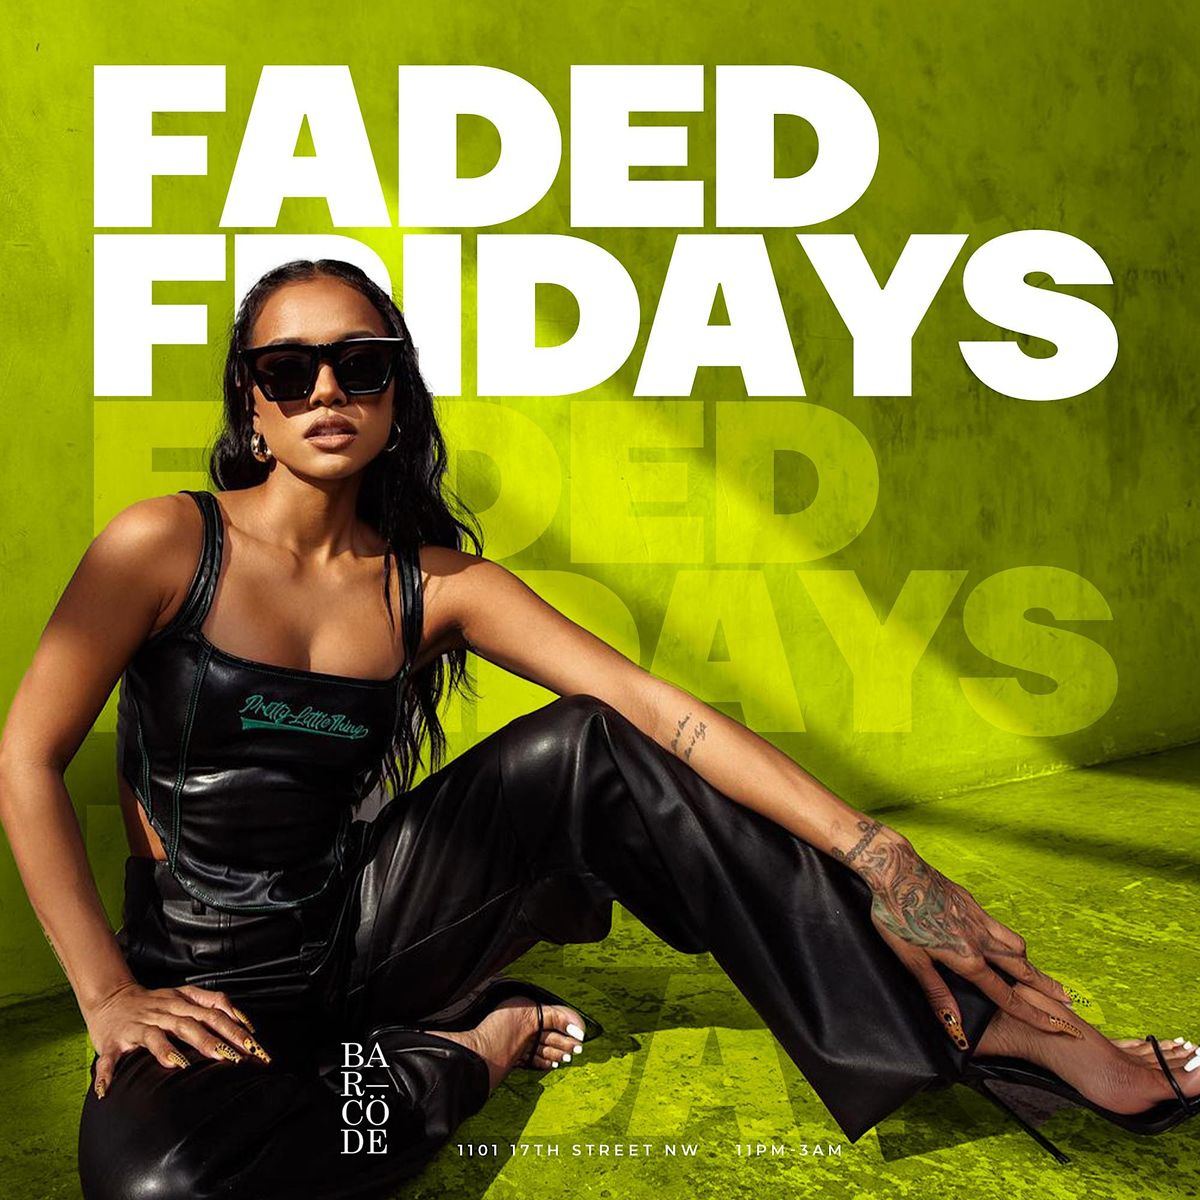 Faded Fridays @Barcode